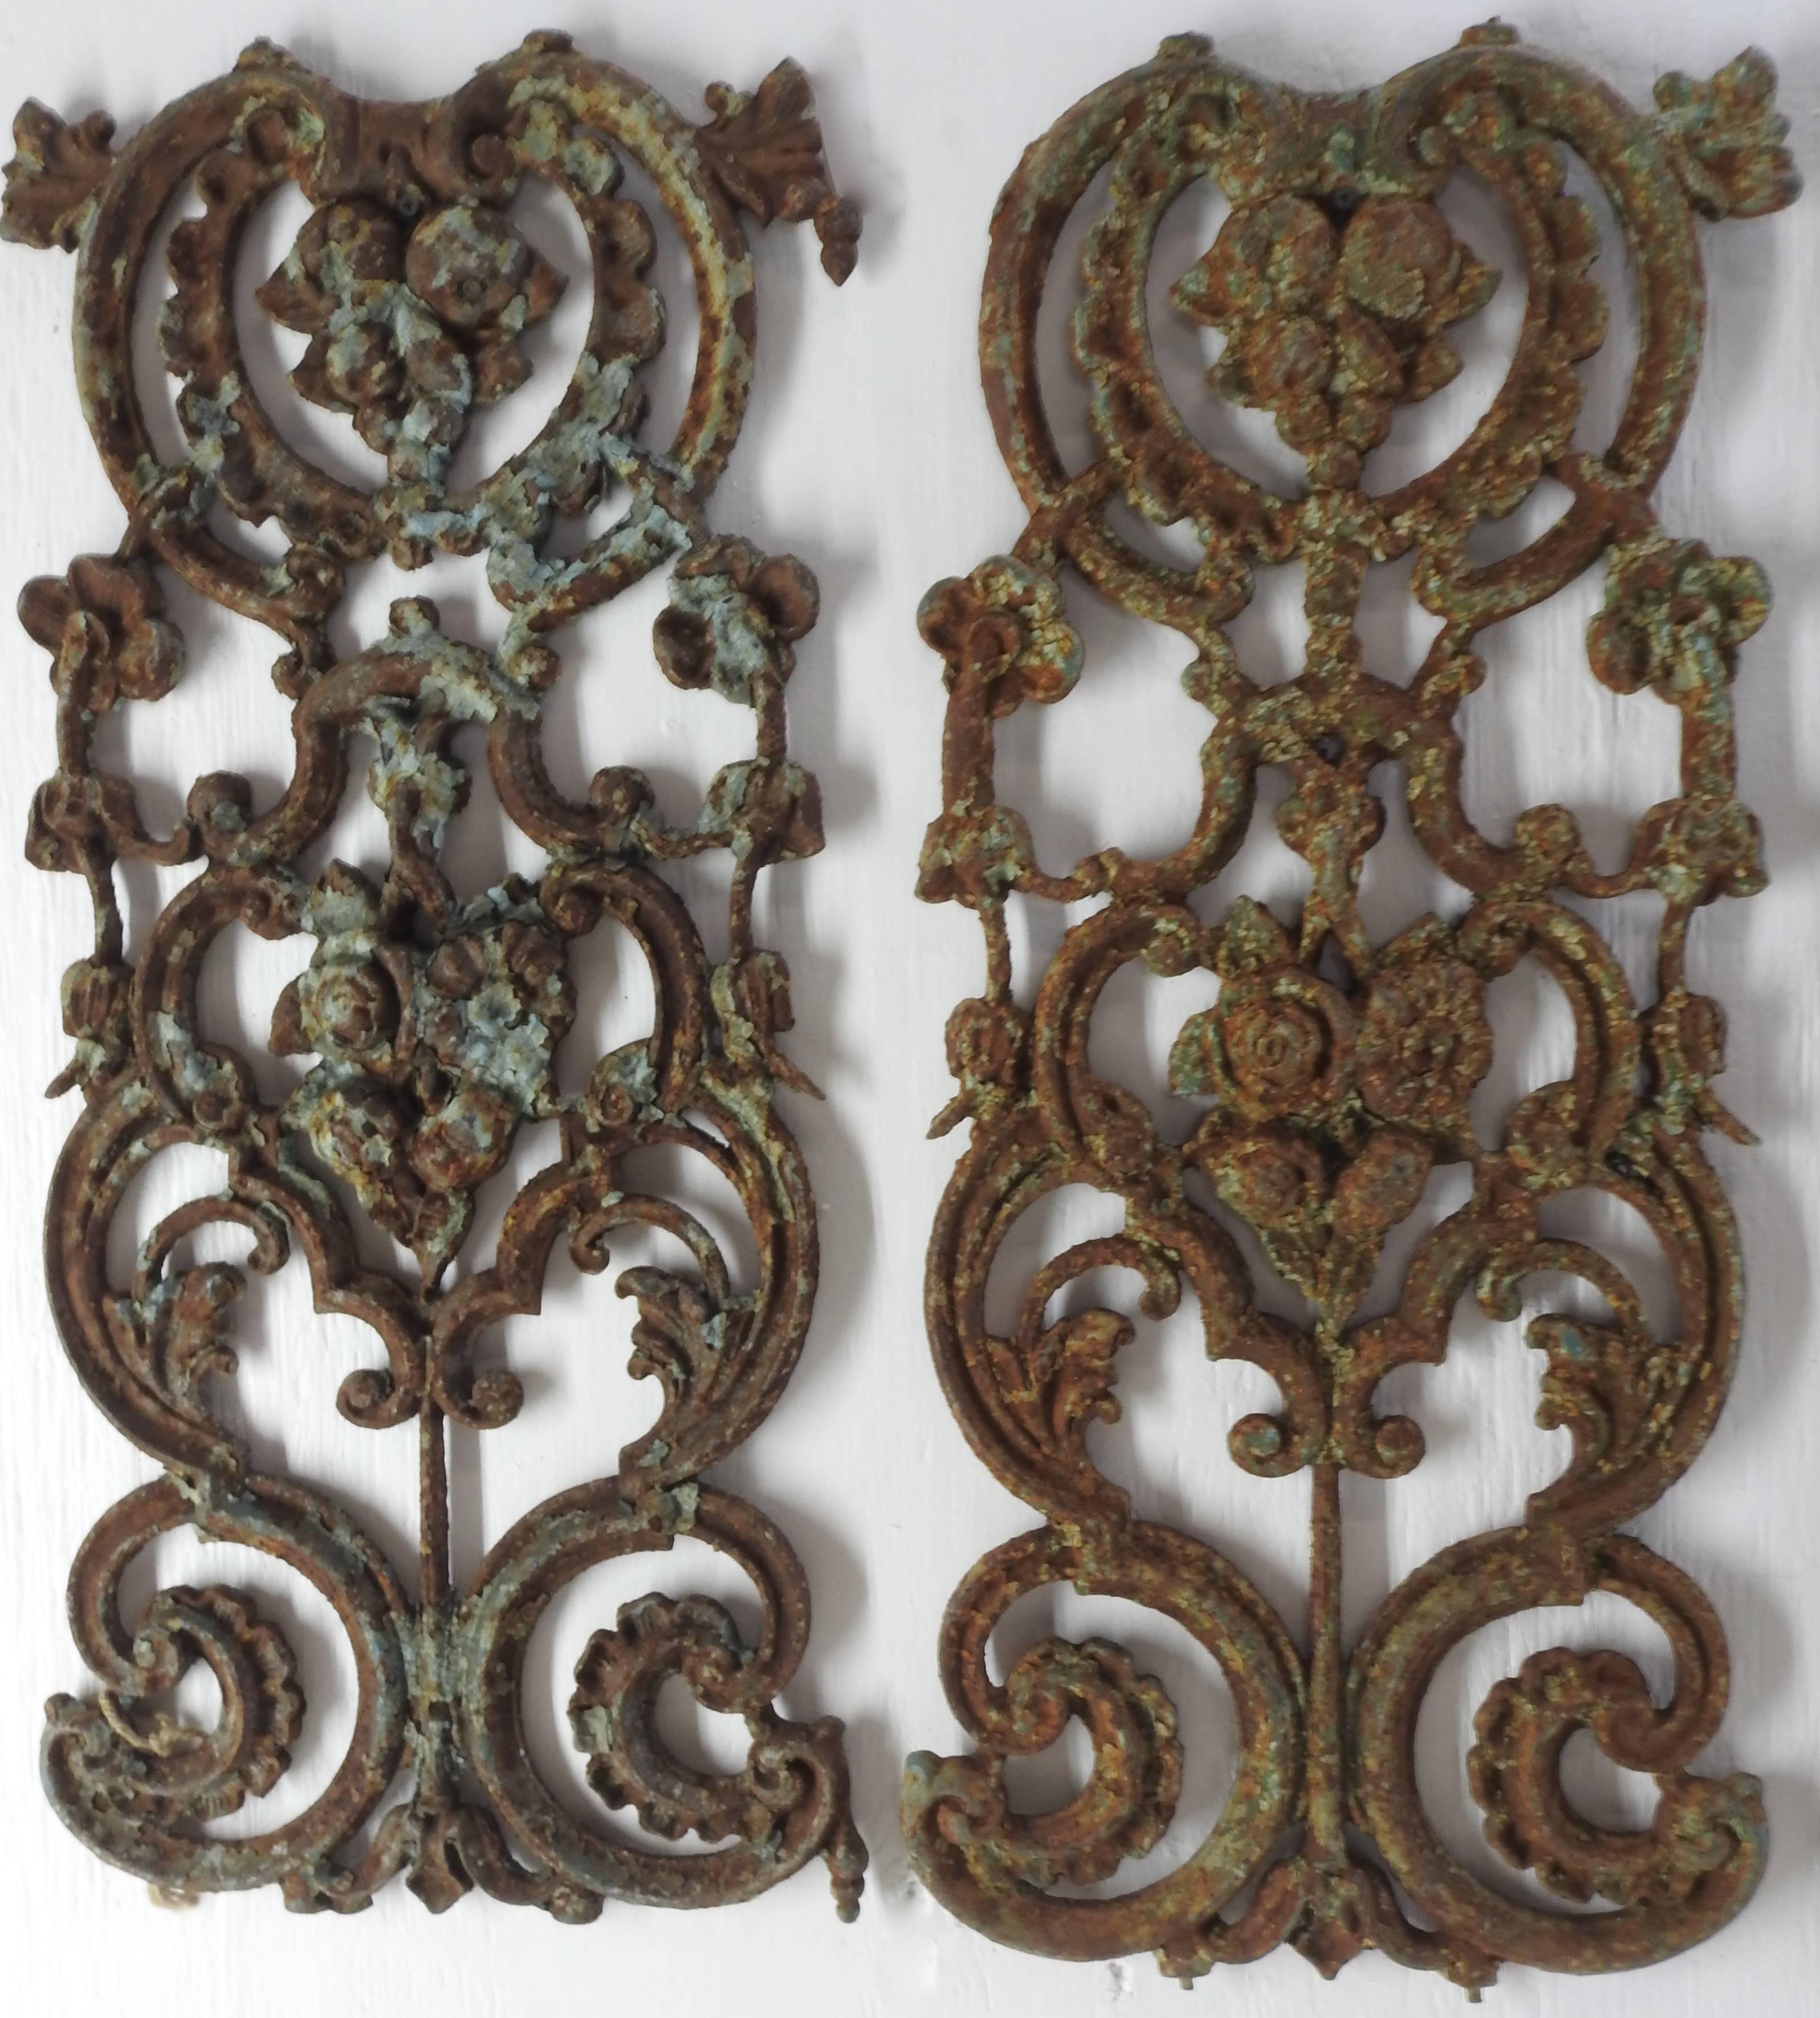 This is a nice set of wrought iron panels in the Victorian style. They feature swirls of metal with floral details. The panels have remains of turquoise paint to give them a rustic look.
  